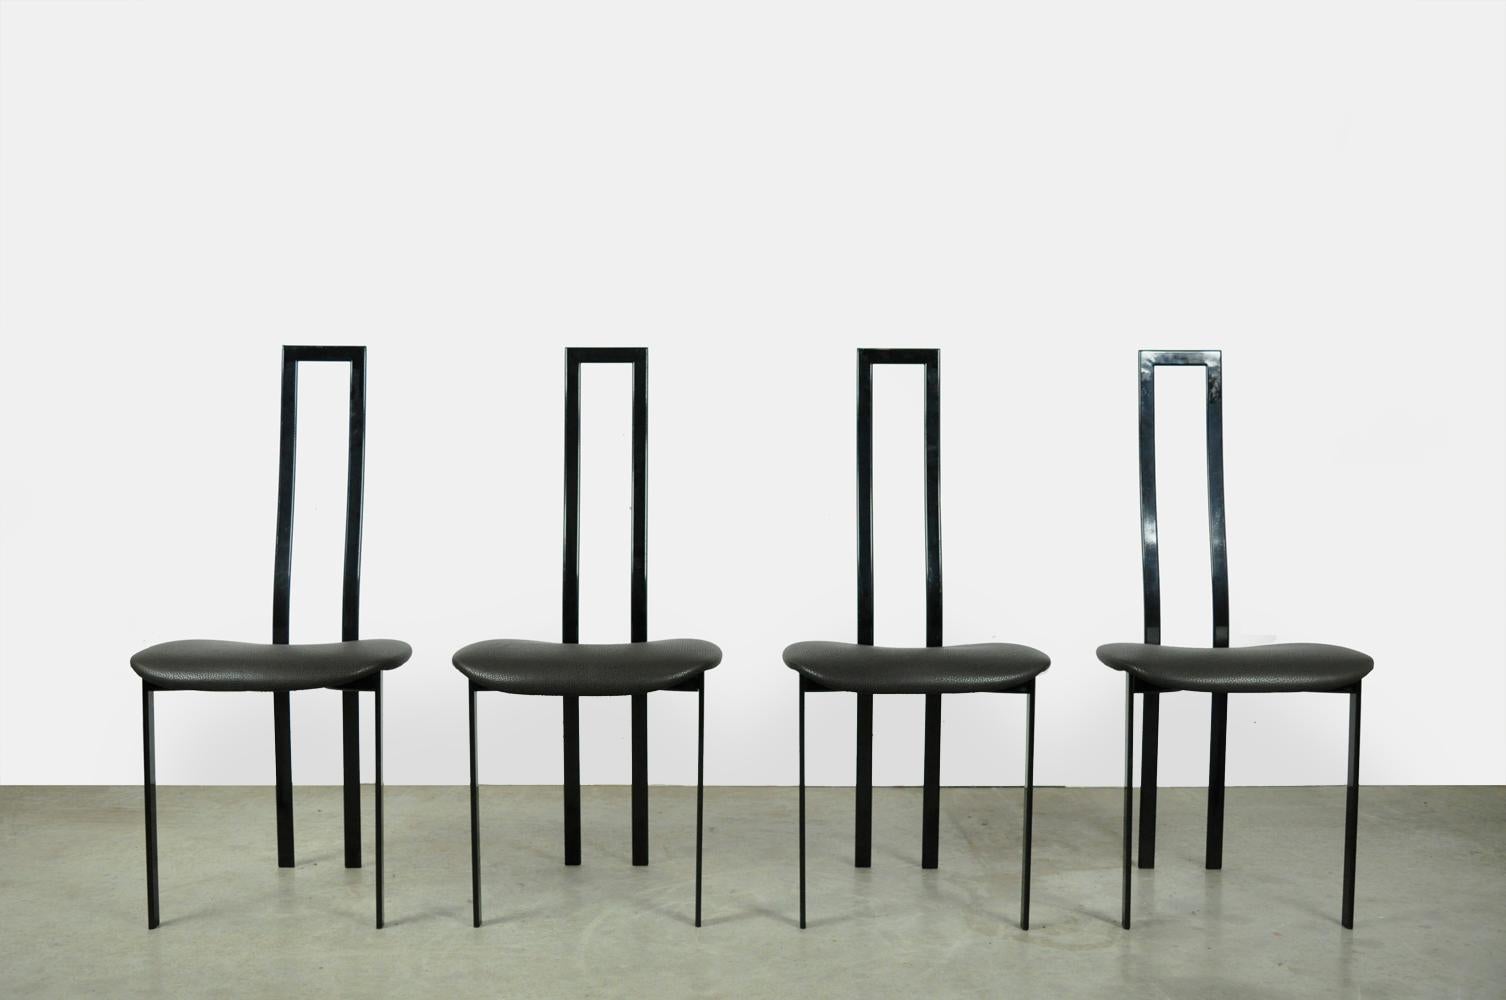 Set of 4 postmodern dining table chairs designed by the Italian artist Maurizio Cattelan, 1980s. The elegant chairs have a slim black metal frame and a fabric seat in mixed black-gray dots. The chairs are all marked.